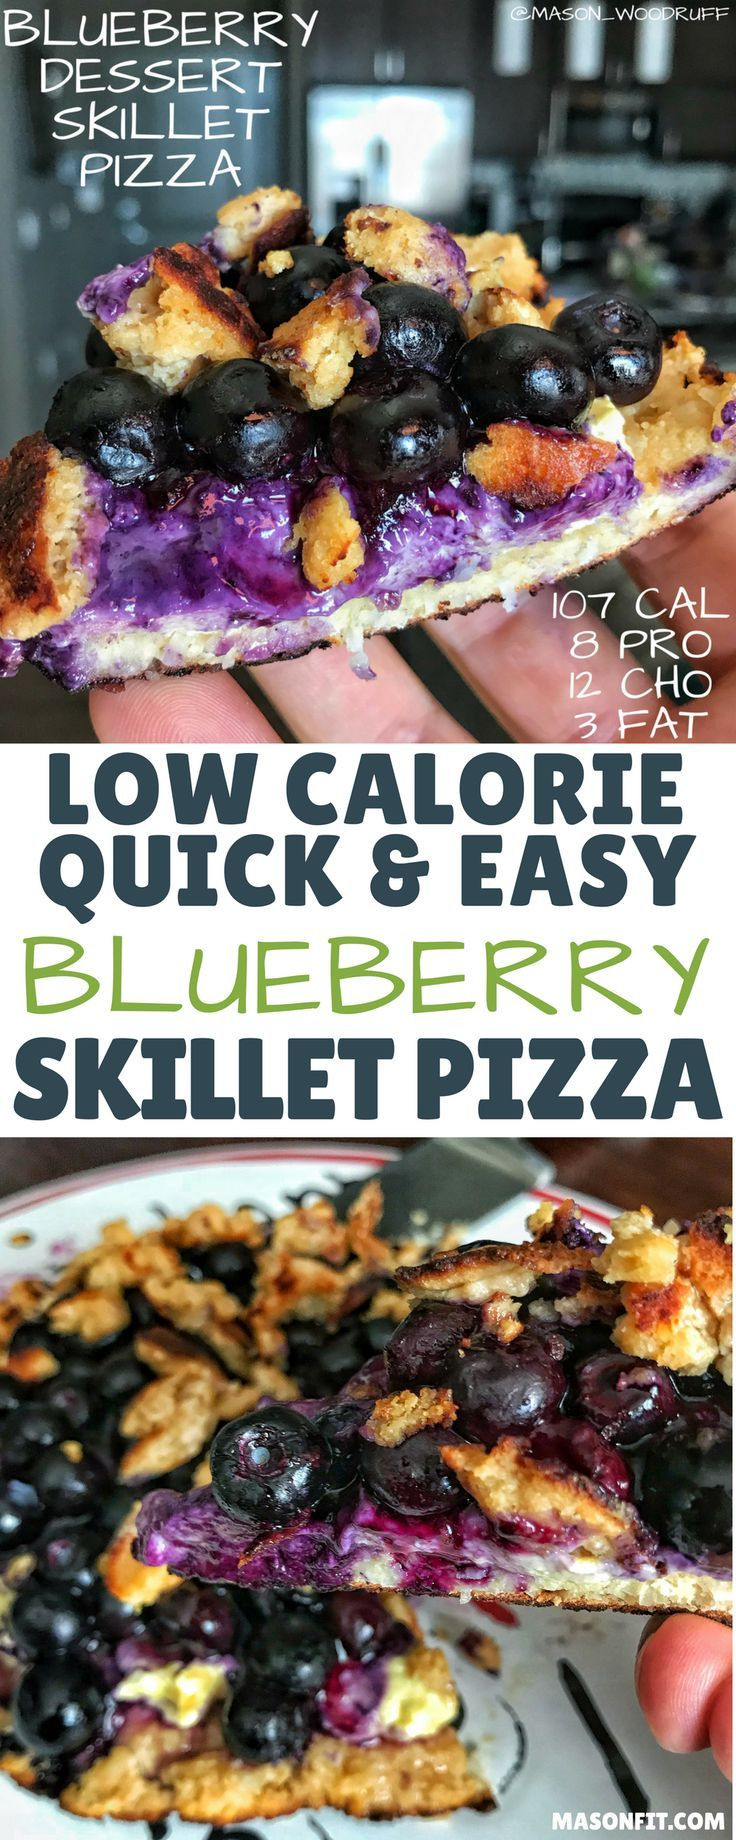 Low Calorie Blueberry Desserts
 A low calorie blueberry dessert skillet pizza with 8 grams